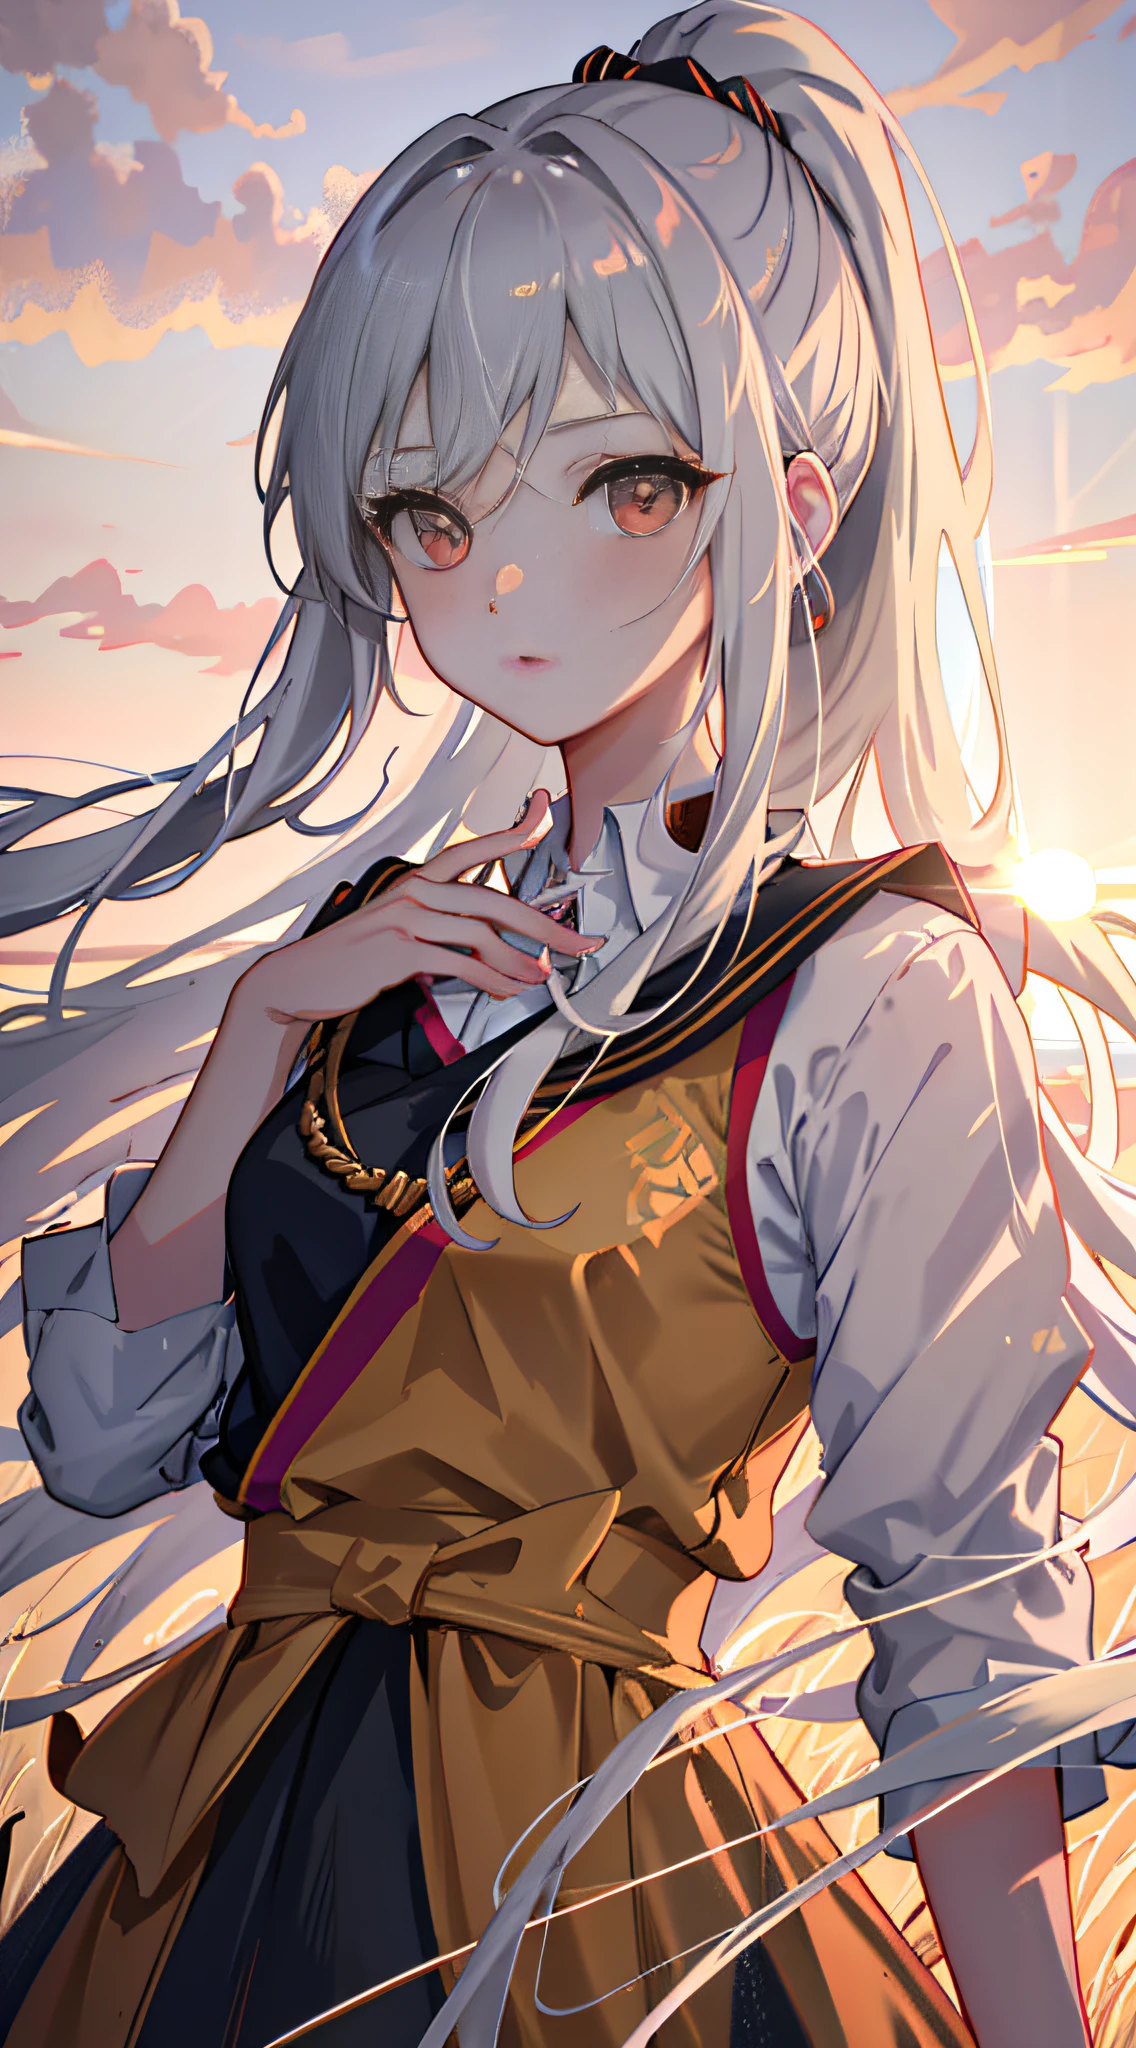 Masterpiece, Superb Anime Style, Girly, Super Delicate Face, Super High Resolution, Delicate Face, Delicate Eyes, Eye Details, Face Details, Finger Details, Stunning Face, 1girl, Portrait, Silver Hair, High Ponytail, Ponytail, Red Eye, Samurai, Wheat Landscape, Wheat Field, Sunset, Sun, Clouds, (Neutral Color), (HDR:1.4), Simple Background, Background Blur, Stunning Lighting, C4D, OC Rendering, Movie Edge Light, Fine Light,